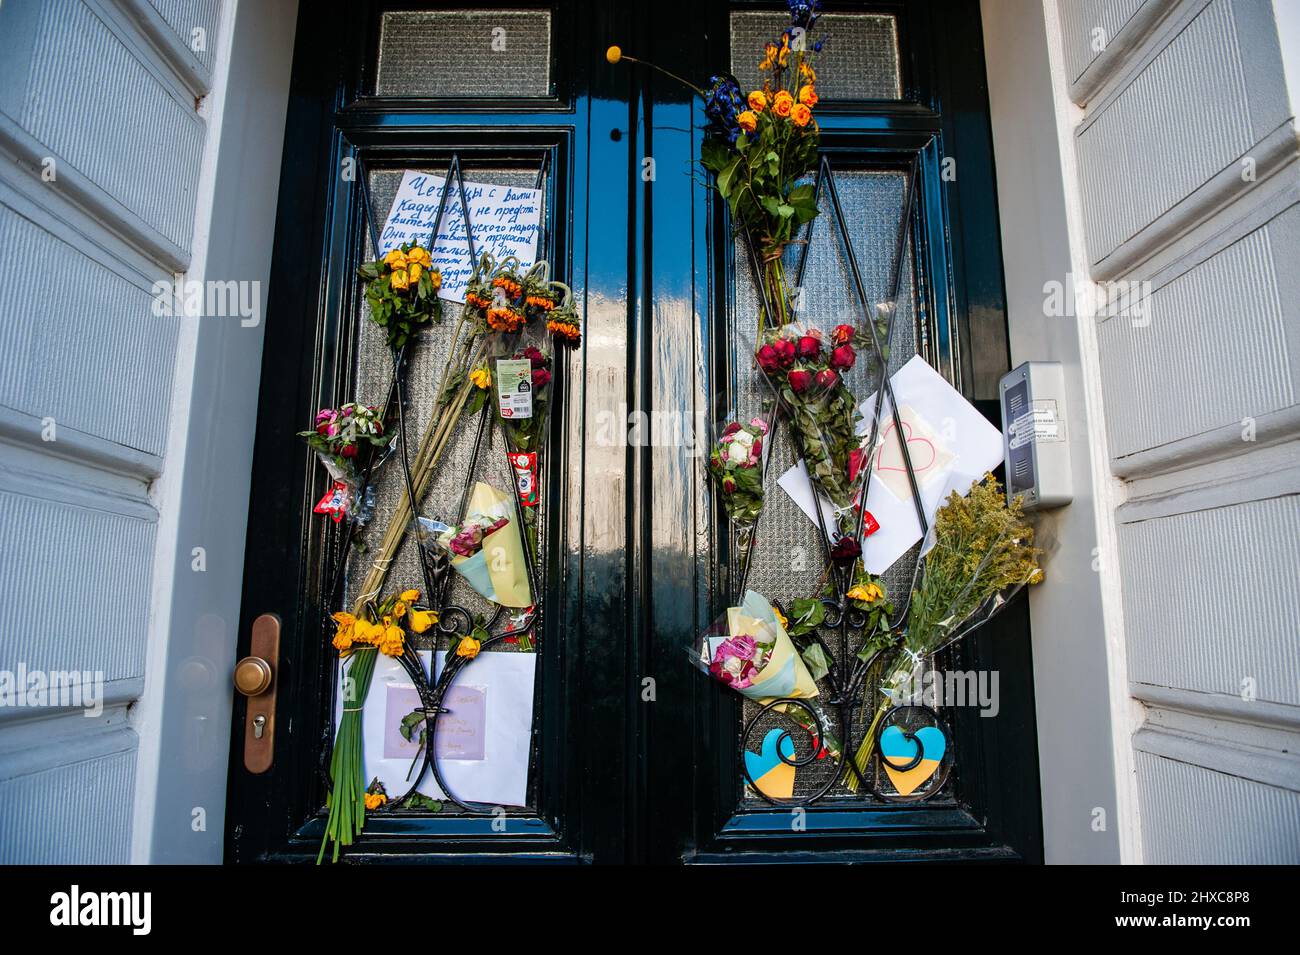 The door of the Embassy of Ukraine in The Netherlands decorated with flowers and placards in support of Ukraine and against war. Since Putin's invasion of Ukraine started two weeks ago, the facade of the Ukrainian Embassy in The Hague has been decorated with flowers, Ukrainian flags, placards, and messages in support of the Ukrainian people. At least 1.4 million people have left Ukraine since Russia invaded last month and around 516 civilians have been killed and 908 injured in the fighting. U.N. monitors said 37 children have been killed and 50 injured since the start of the conflict. Stock Photo